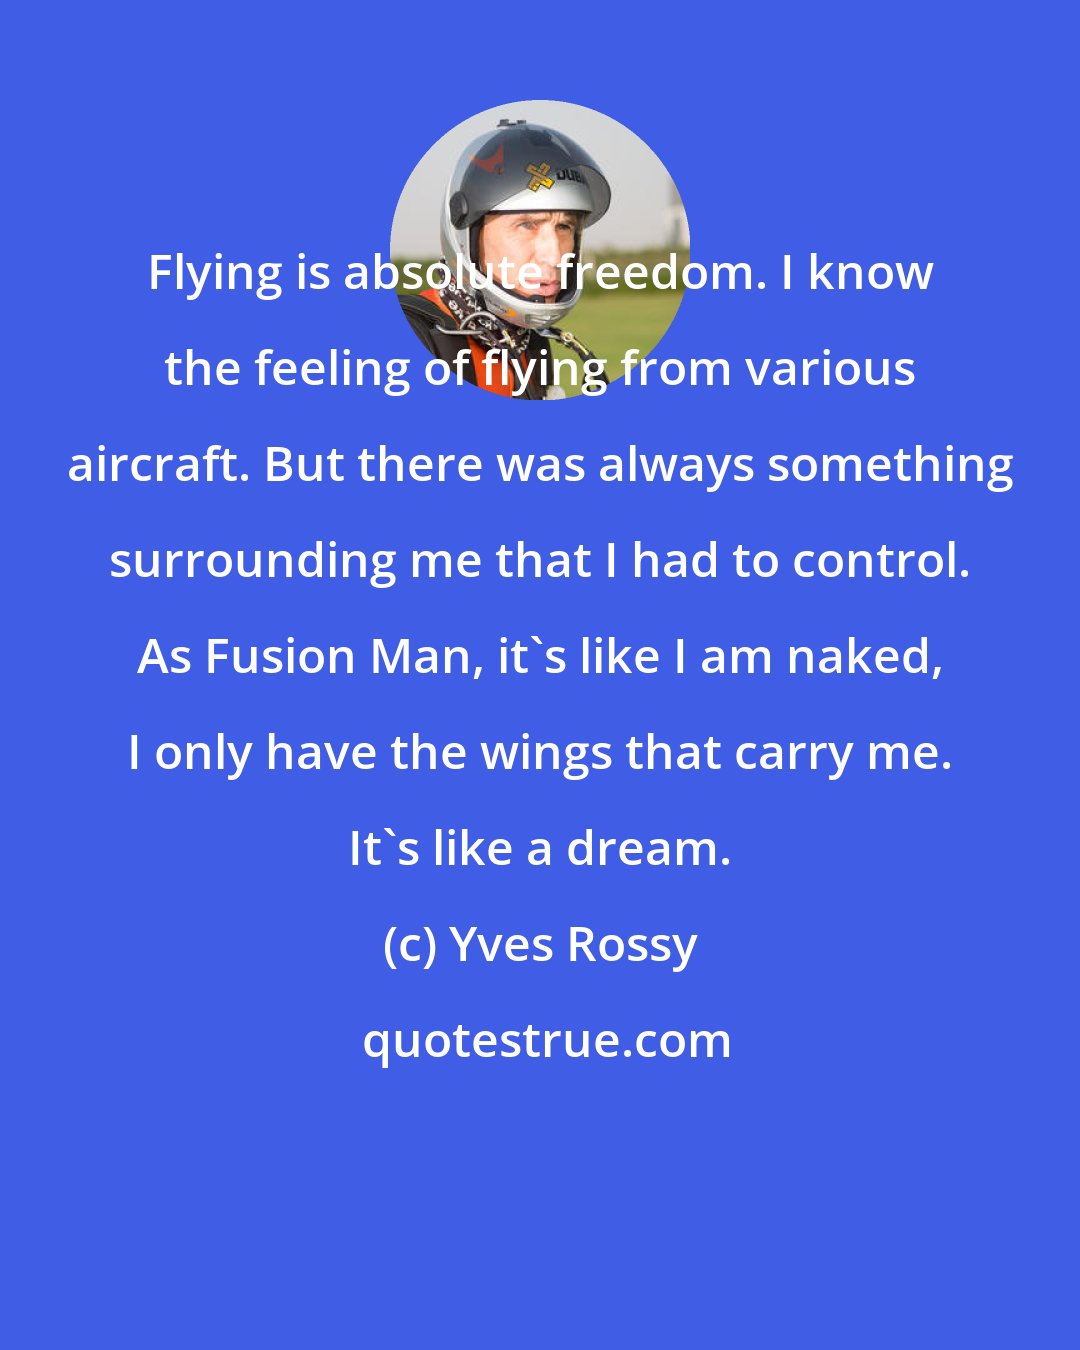 Yves Rossy: Flying is absolute freedom. I know the feeling of flying from various aircraft. But there was always something surrounding me that I had to control. As Fusion Man, it's like I am naked, I only have the wings that carry me. It's like a dream.